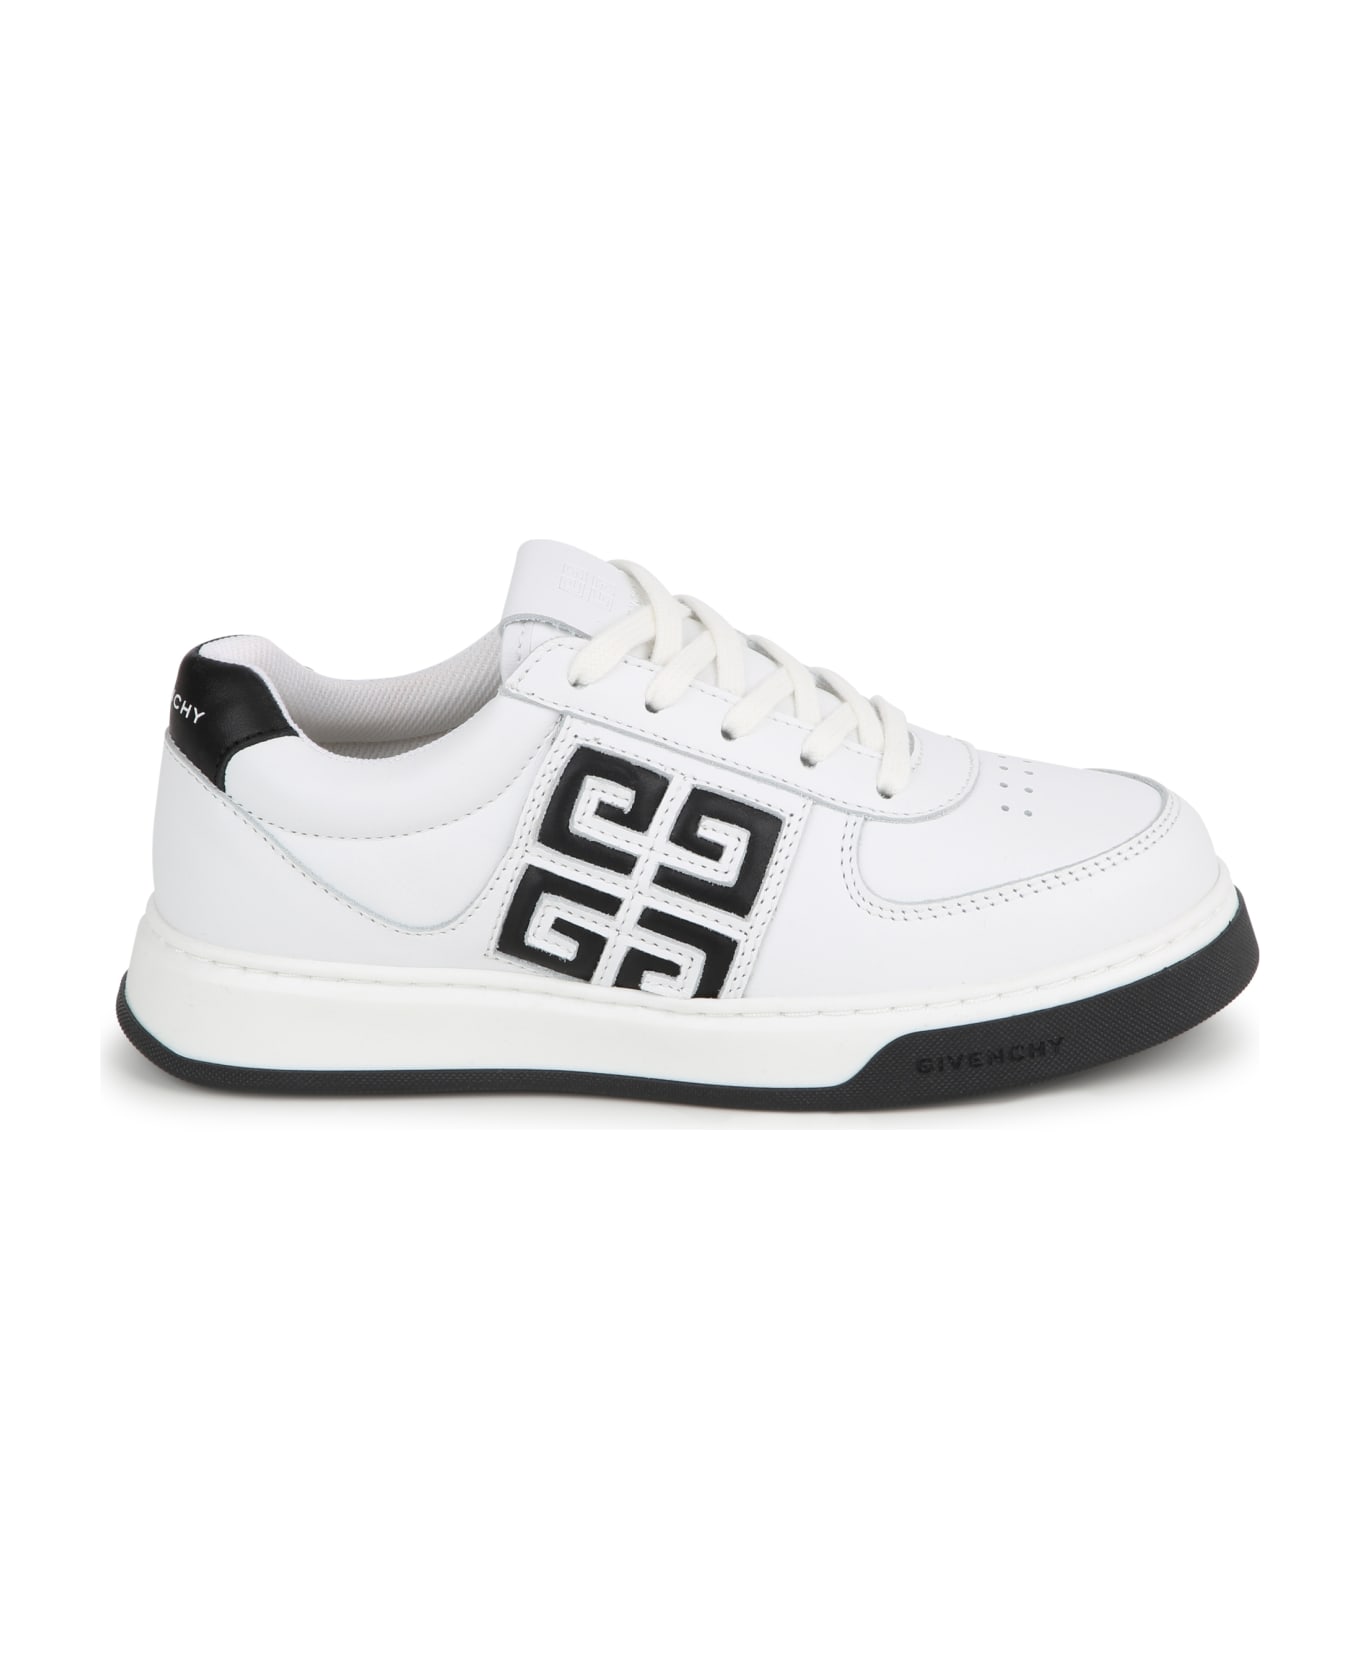 Givenchy 4g Leather Sneakers - Bianco